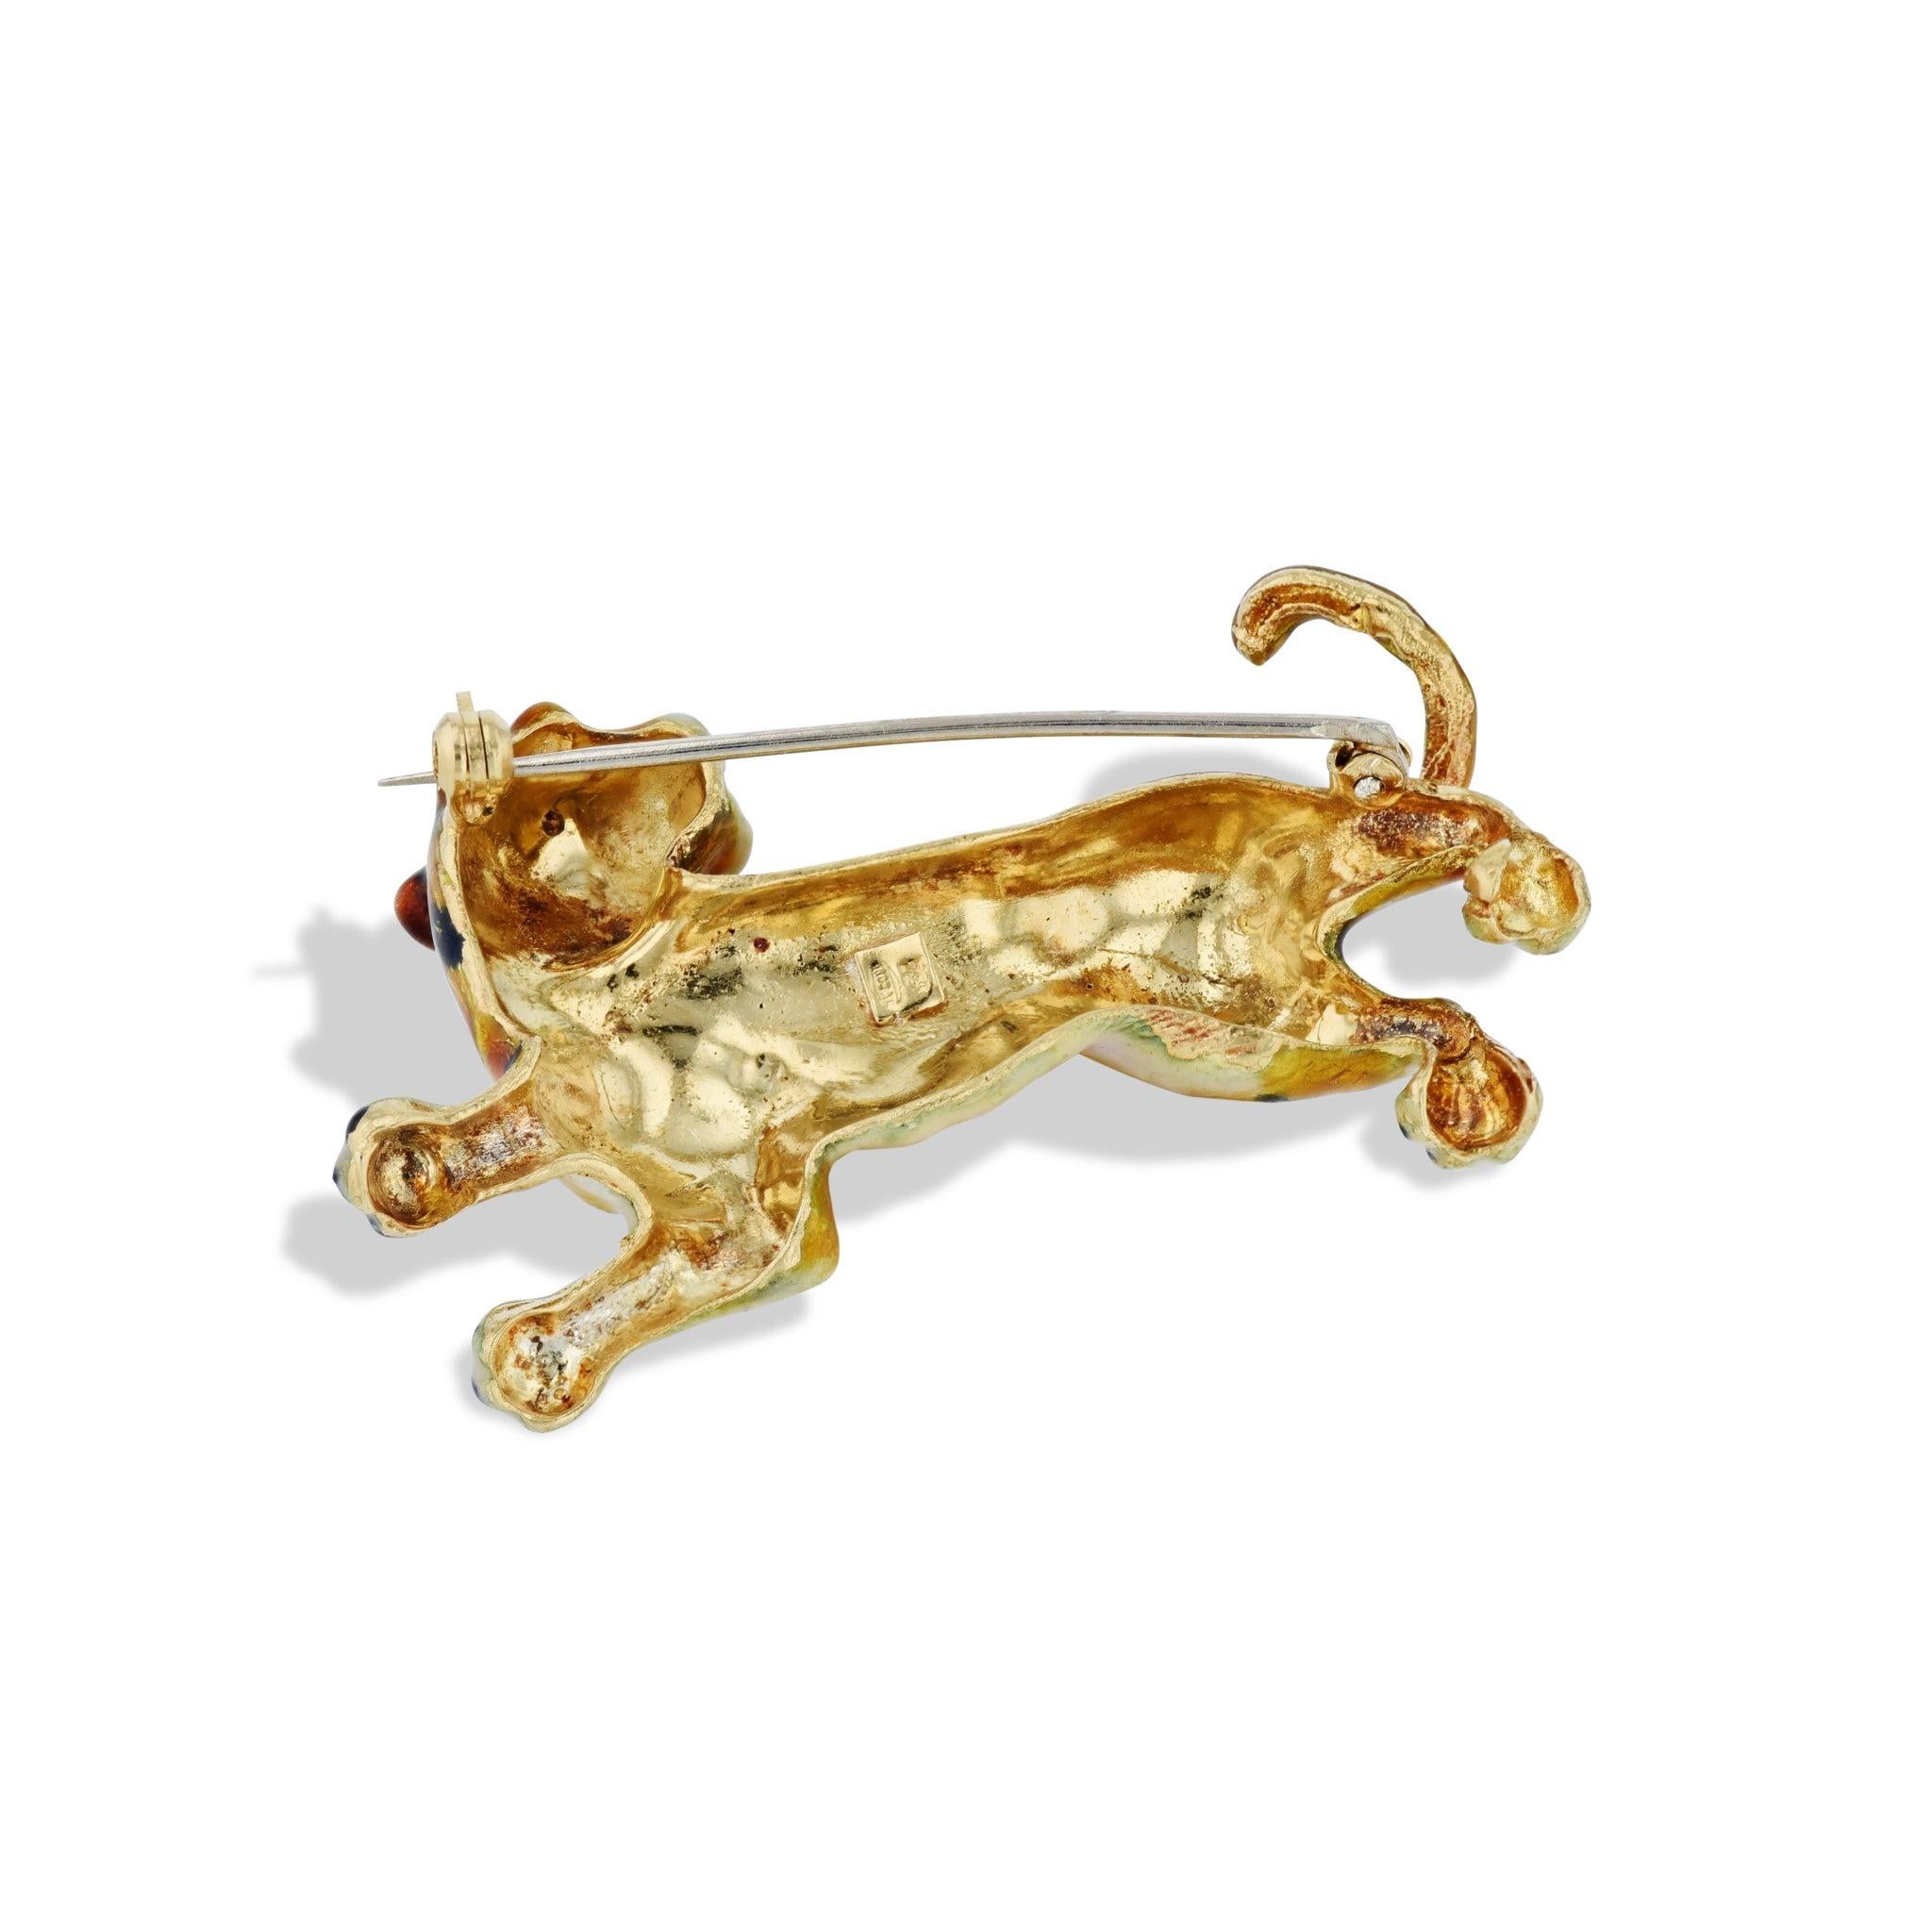 Unlock the grandeur of this 18kt. Yellow Gold Italian Tiger Estate Pin! Make a bold statement with a timeless design from the H&H Estate and Vintage Collection.
Yellow Gold Italian Tiger Estate Pin
18kt. yellow Gold
Italian Tiger Design
Estate and